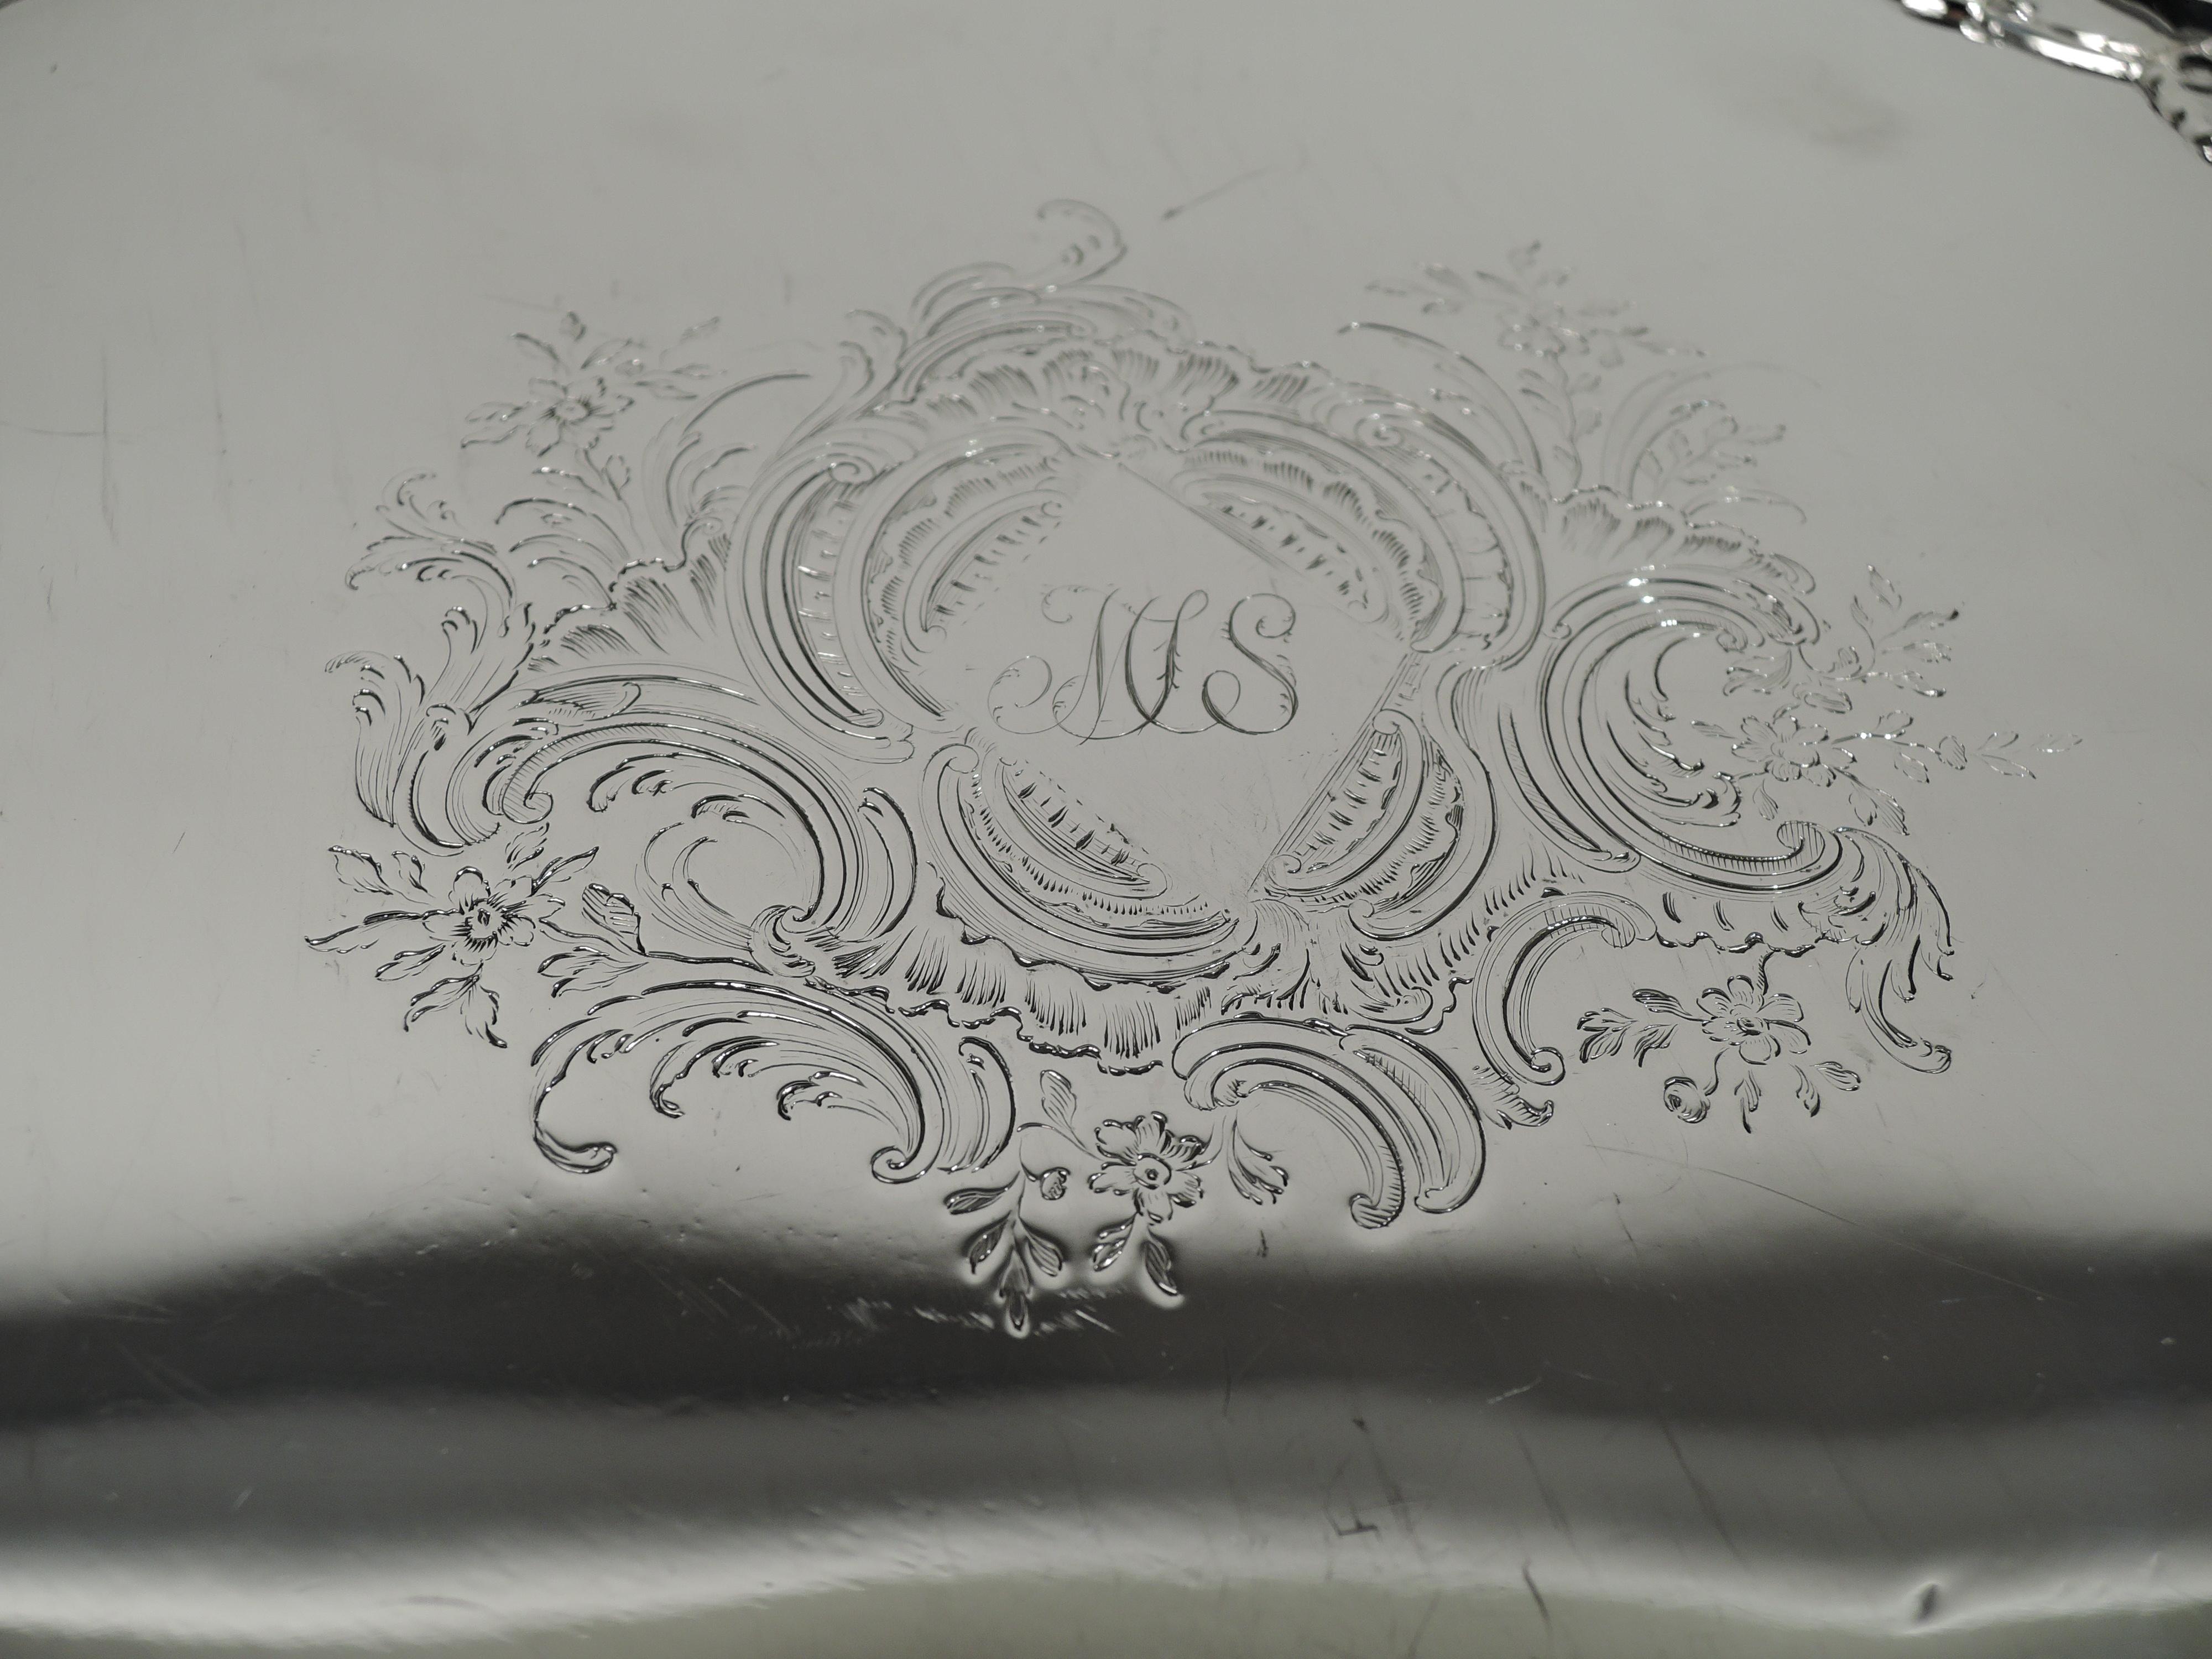 George II sterling silver salver. Made by Richard Rugg in London in 1755. Round with cast serpentine shell-and-leaf rim and 3 leaf-capped volute scroll supports. Well center has lozenge with engraved interlaced script monogram in leafing and